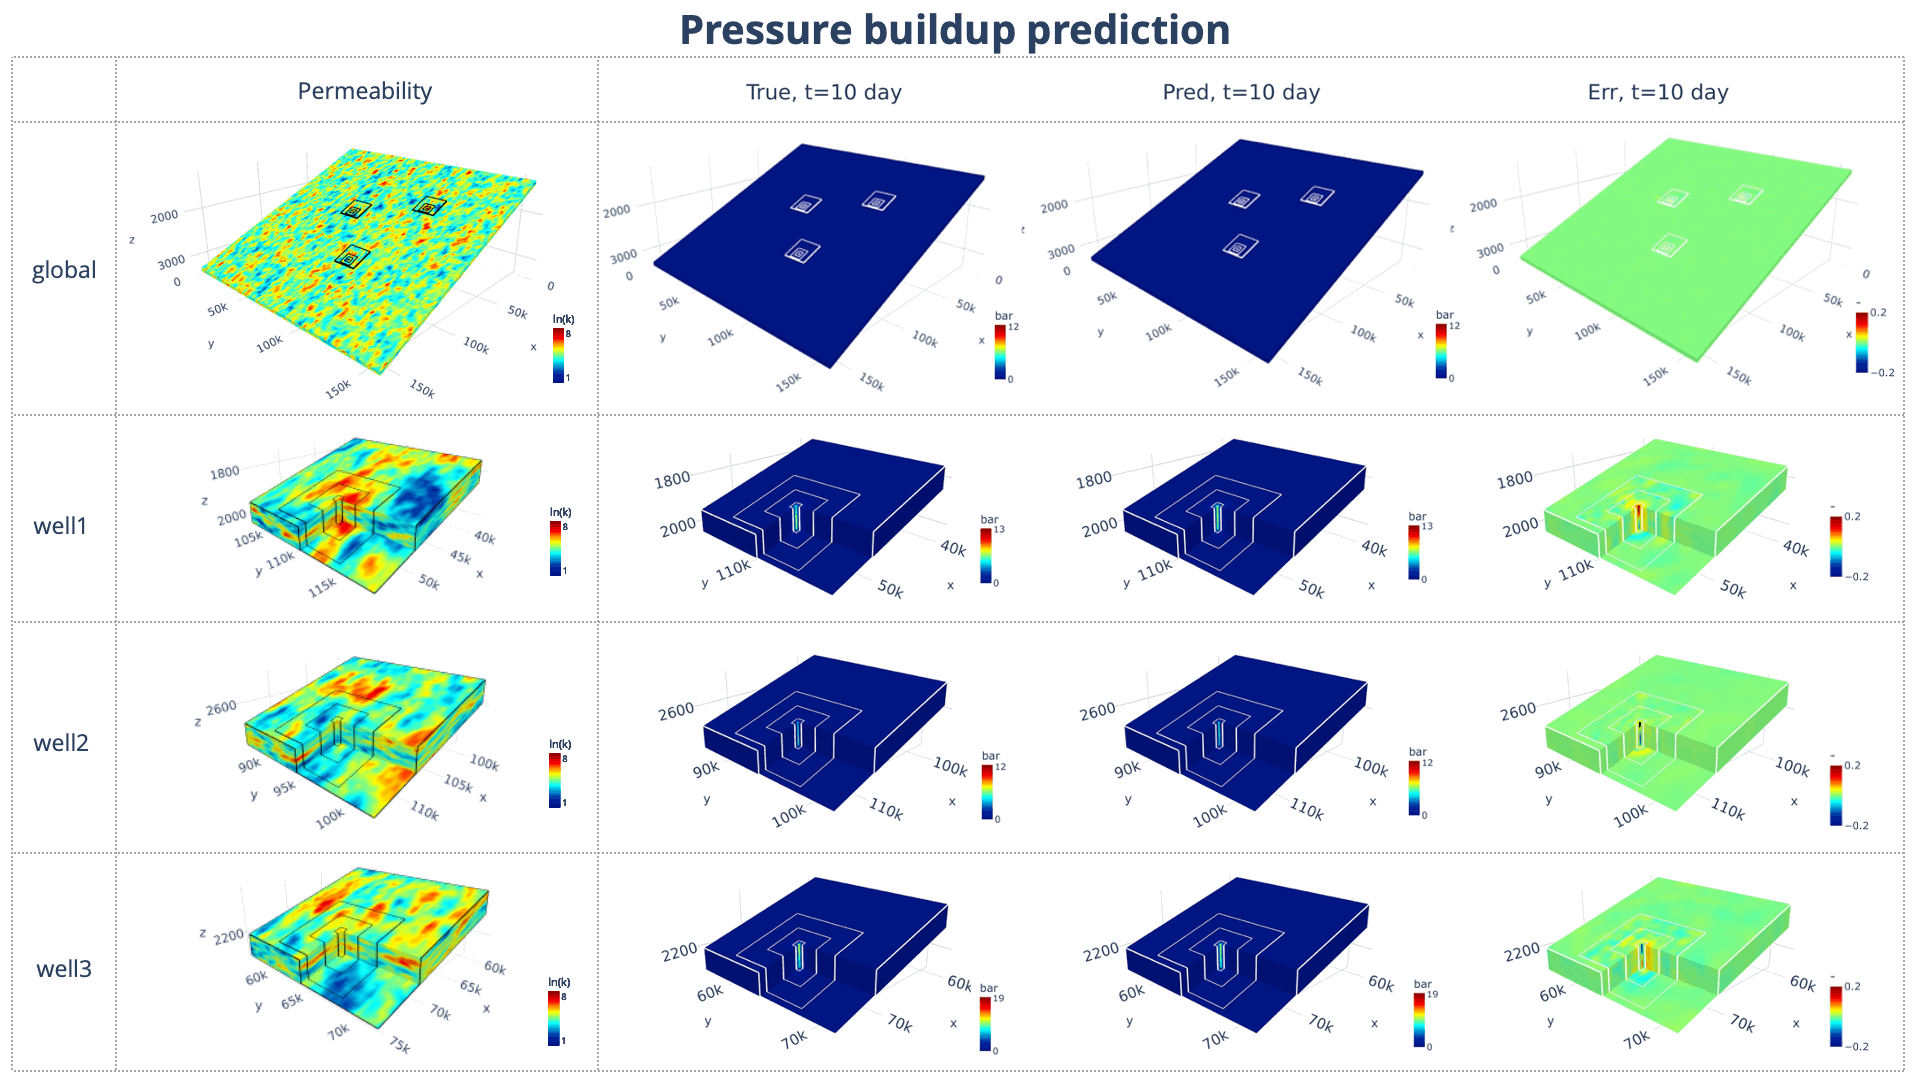 GIF shows pressure evolution over 30 years of injection, including the permeability map, ground truth pressure buildup, predicted pressure buildup, and error for the global reservoir, as well as each injection well.